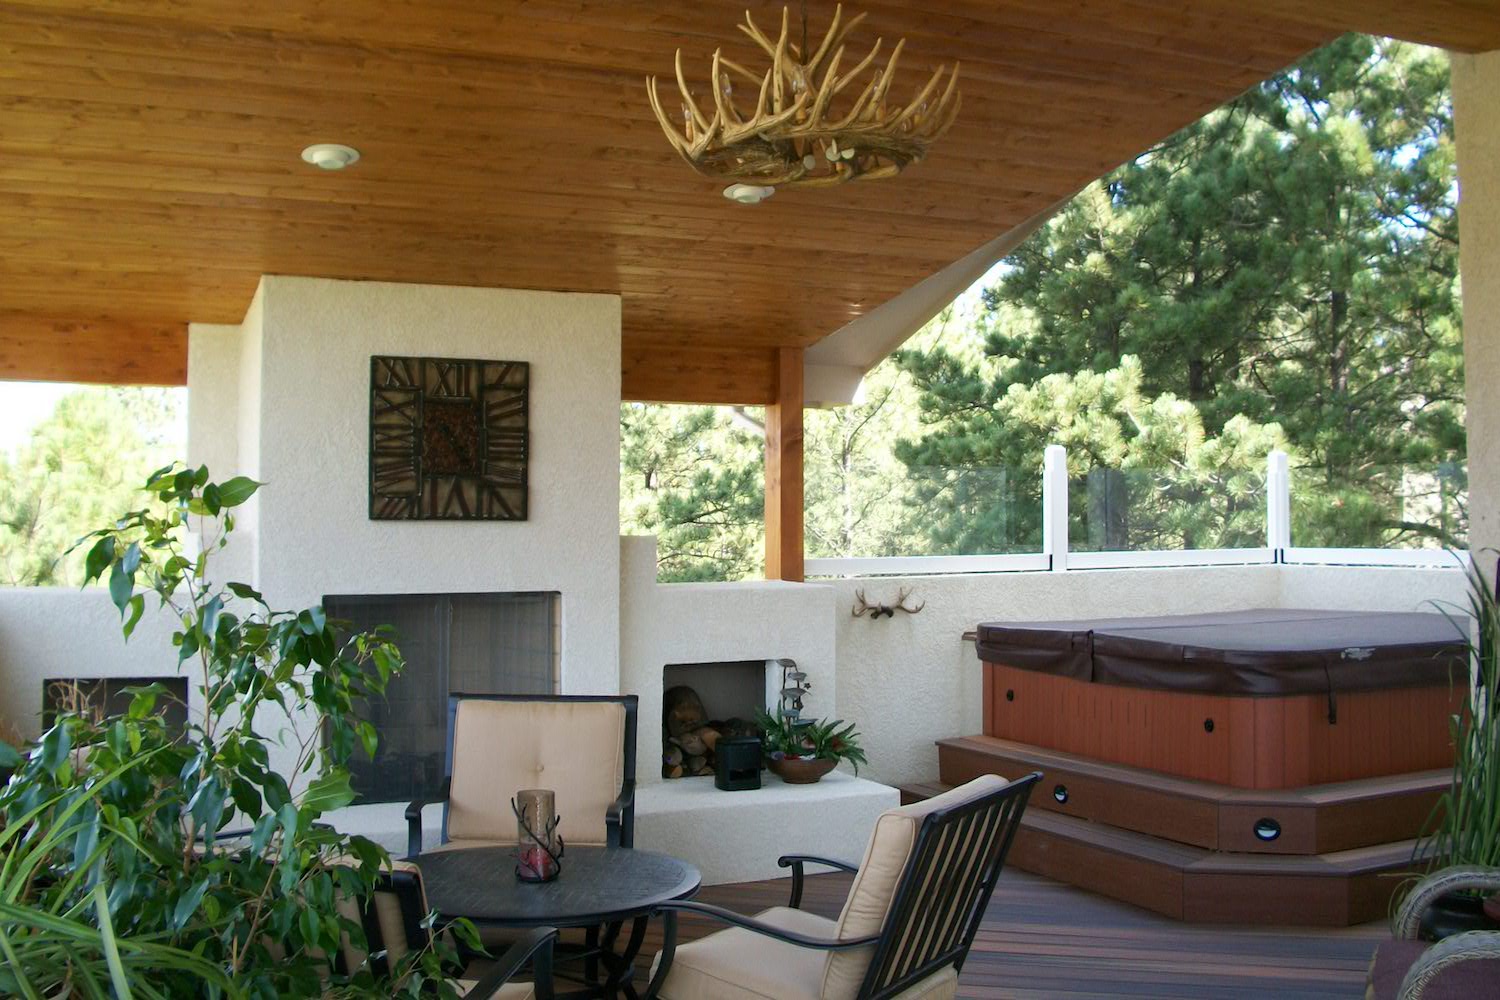 Deck cover with knotty pine vaulted ceiling, antler chandelier, and recessed lighting.